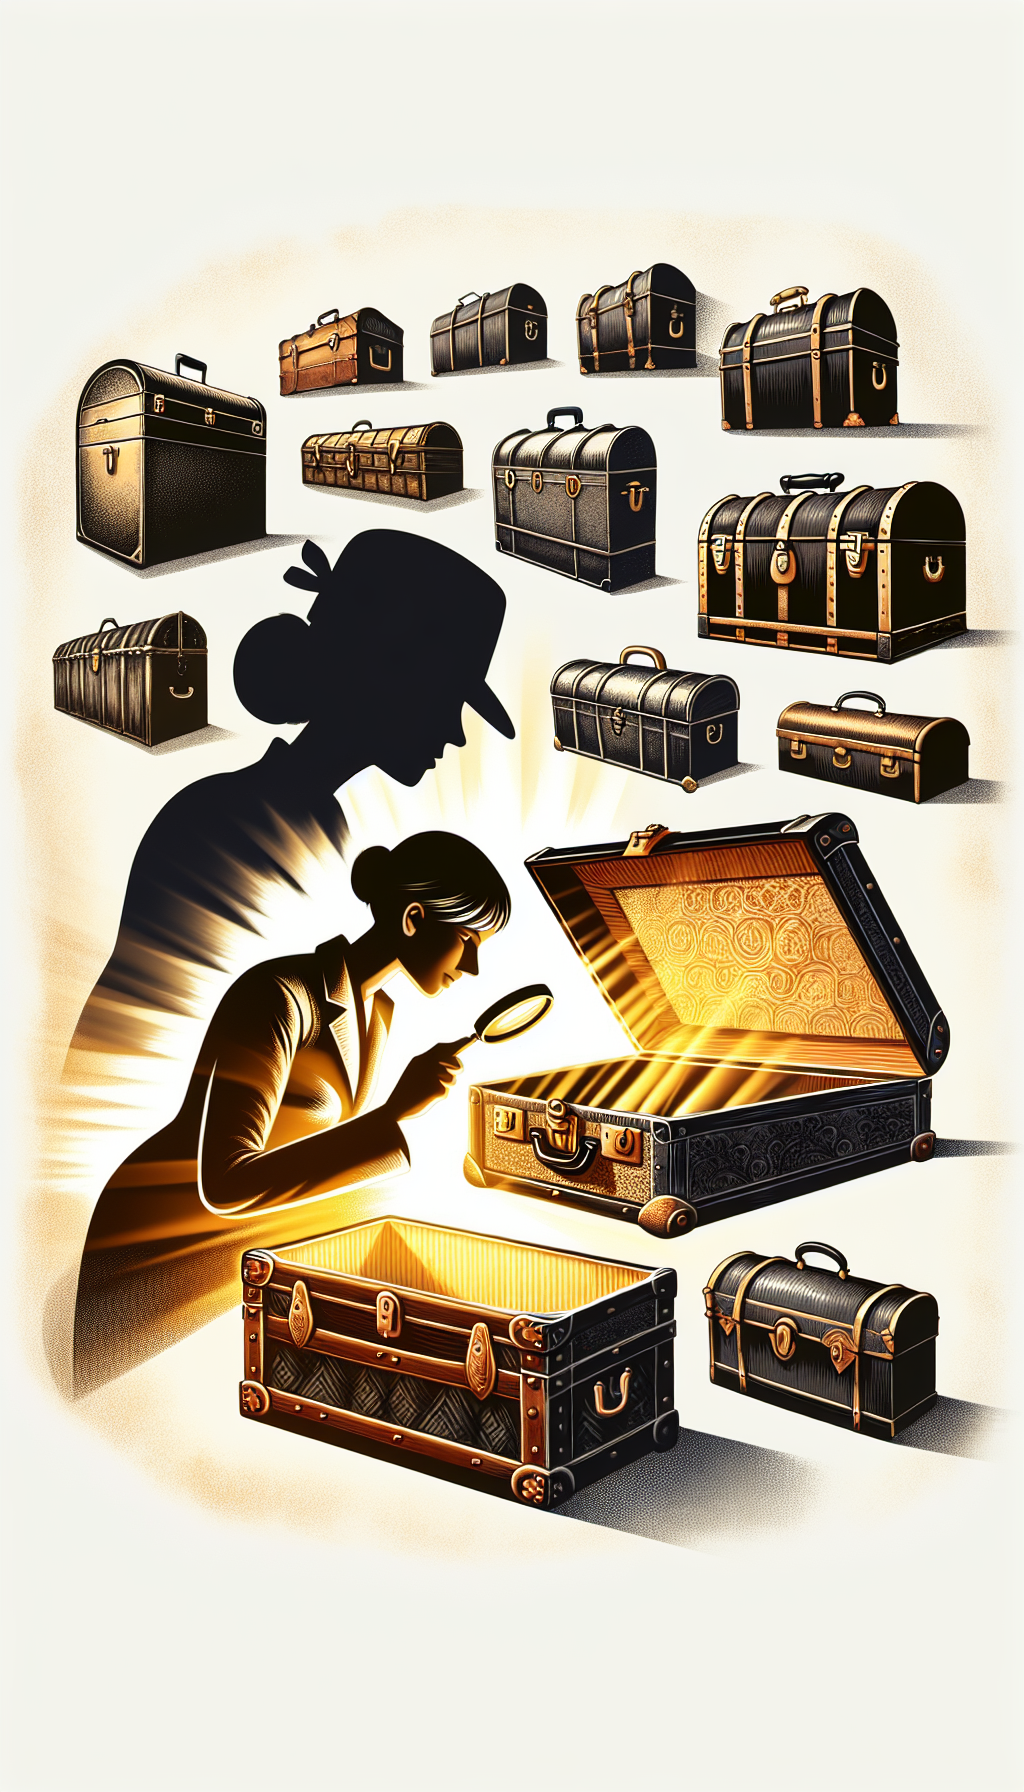 An evocative illustration depicts a detective with a magnifying glass peering into the interior of an open, ornate antique trunk that radiates a golden glow. Shadowy outlines of various trunk silhouettes—steamer, barrel-top, humpback—hover around him, each framed by an identifying label in different elaborate fonts, encapsulating the mystery and diversity of antique trunk identification.